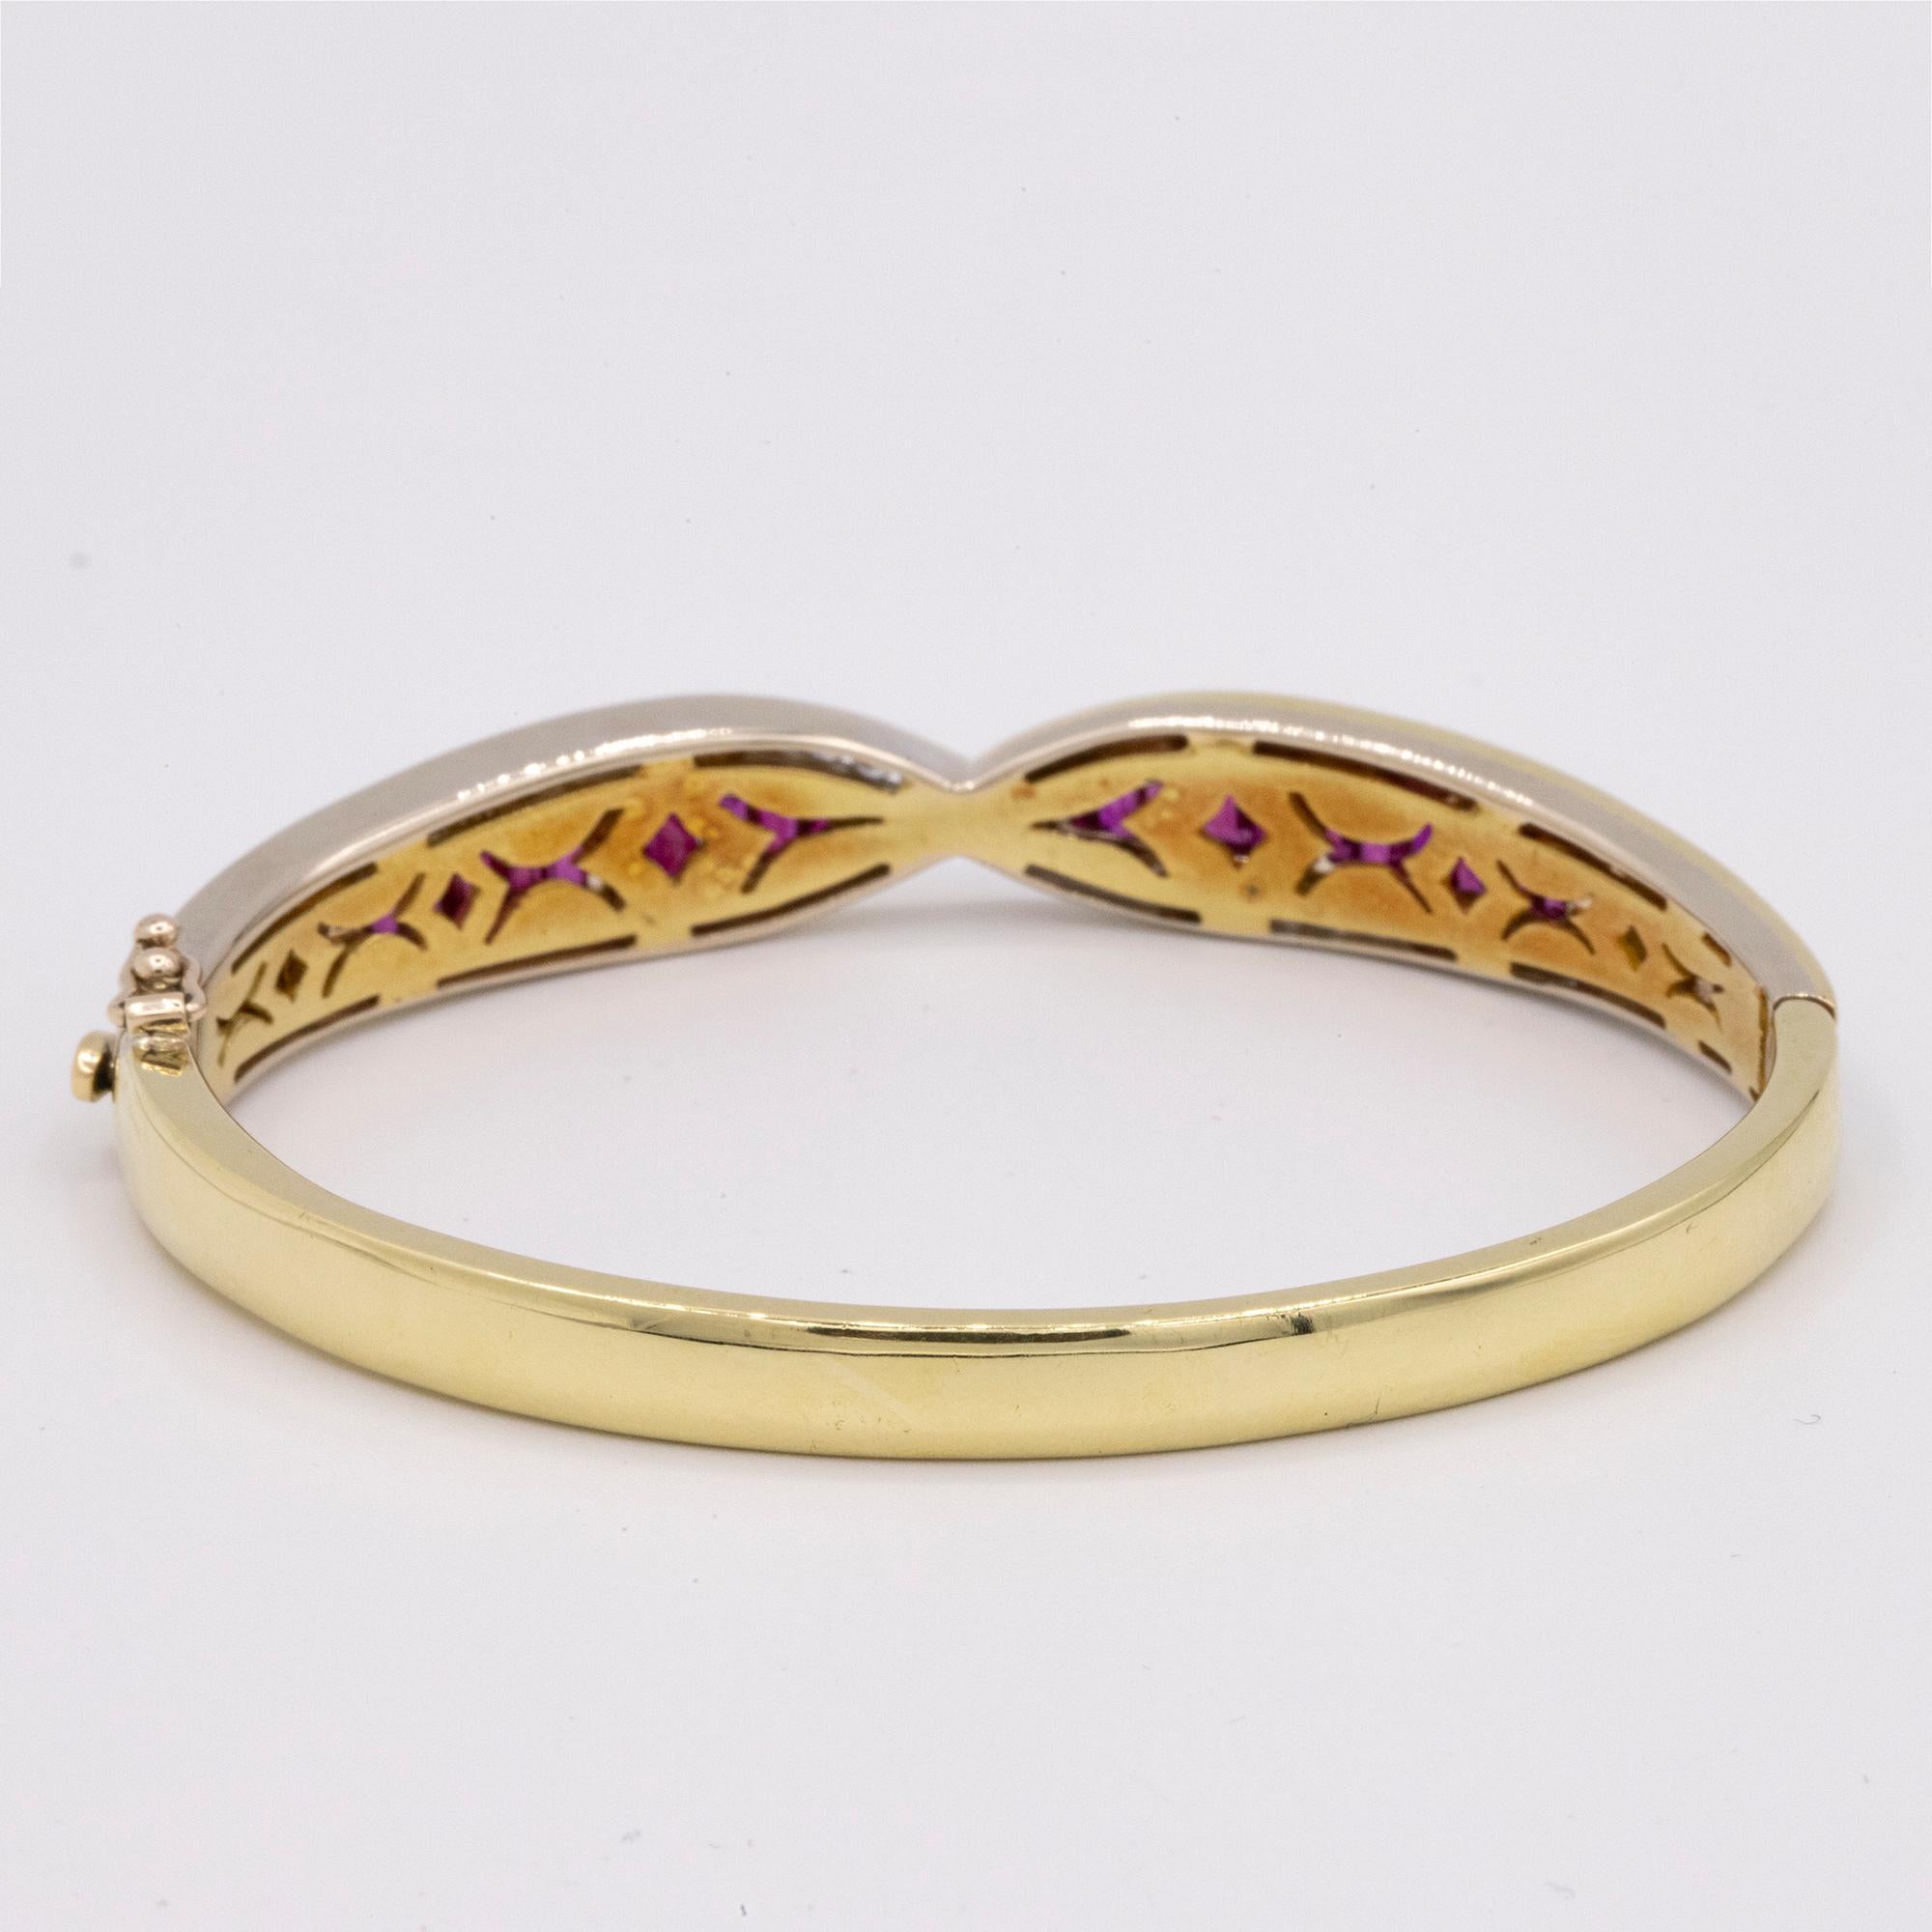 18kt Yellow & White Gold Crossover Ruby & Diamond hinged bangle bracelet. The bracelet has 20 Baguette cut Rubies (10 Channel set on each side) and 29 Round Diamonds channel set weighing approximately .30 carats.